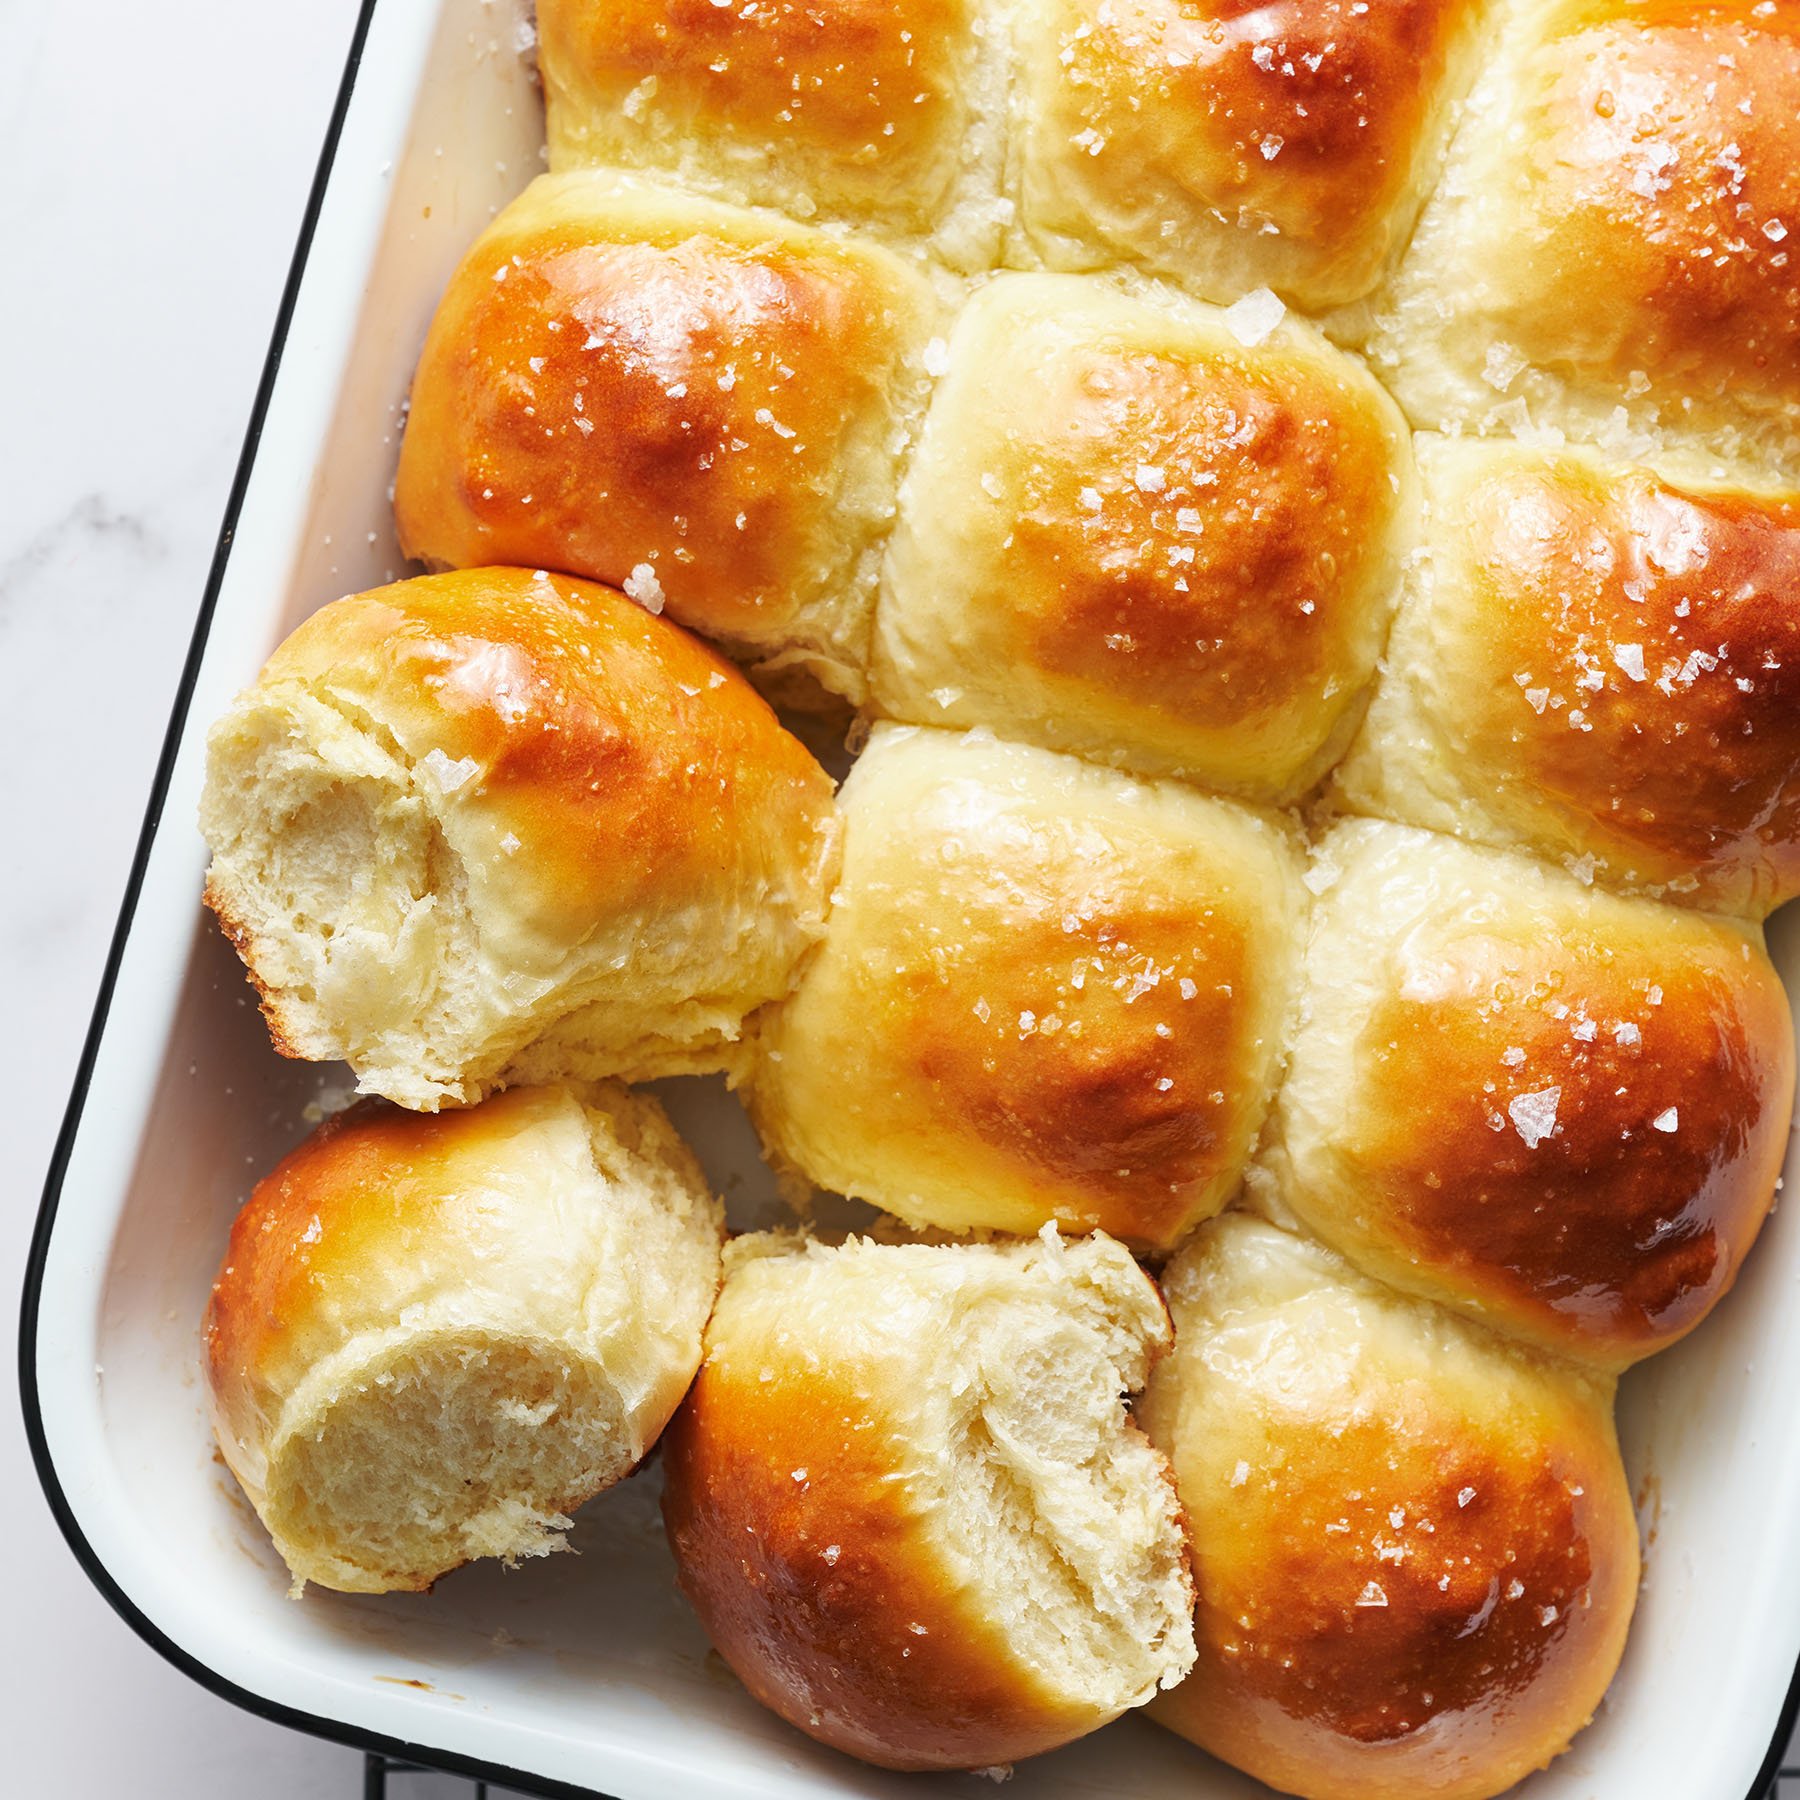 golden brown dinner rolls in a 9x13-inch baking pan, with some rolls on their sides to show the fluffy, soft interior.